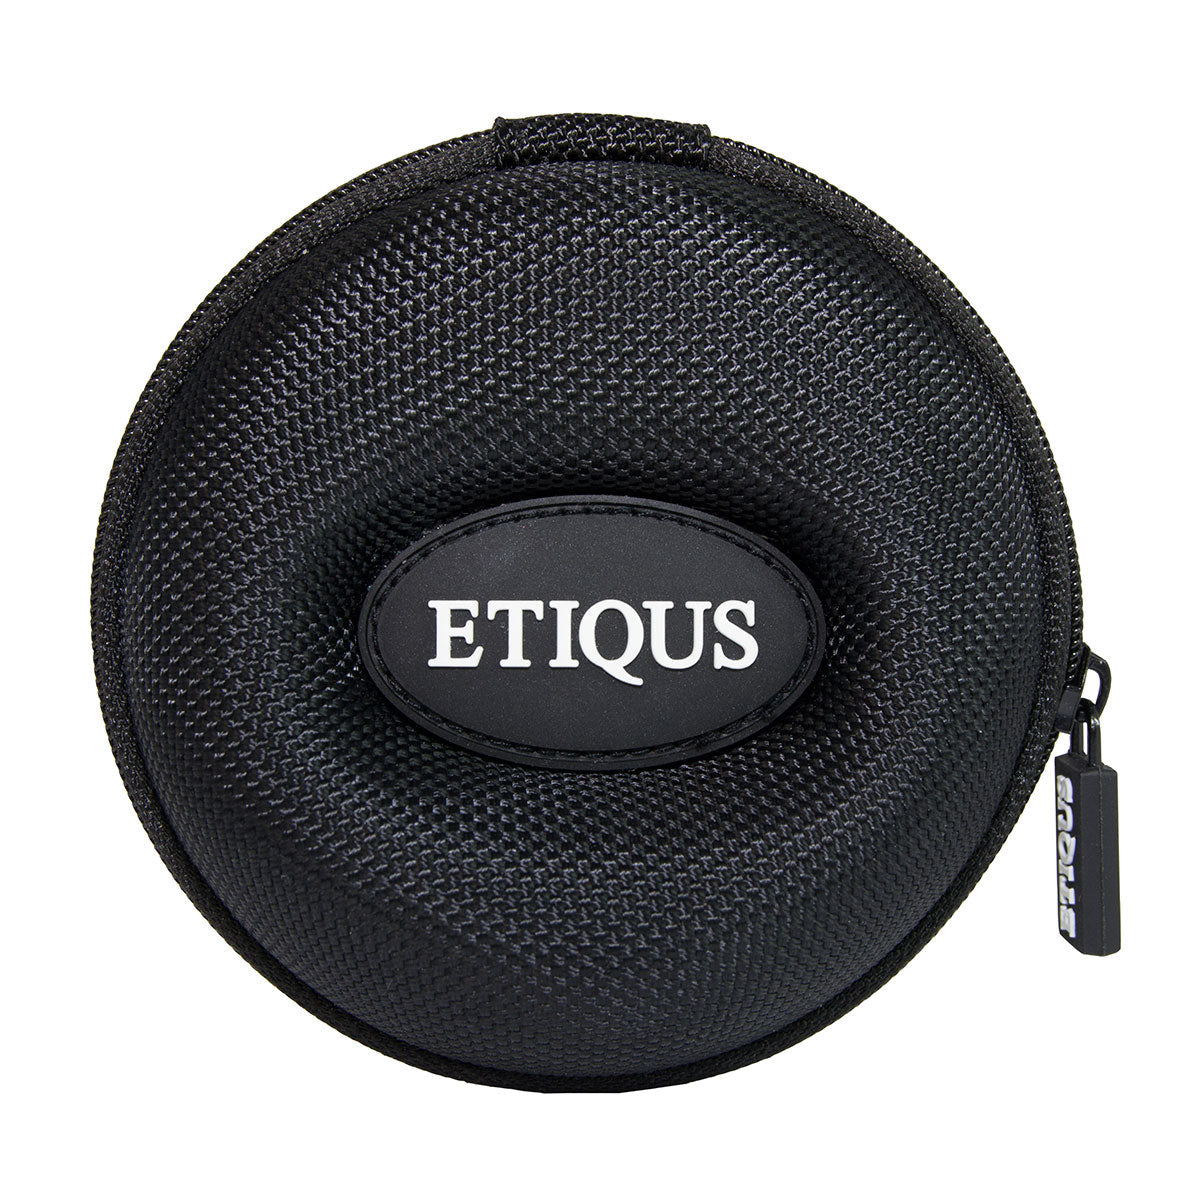 ETIQUS SPORT PRO IONIC with Night Black Dial and Black Ionic Plated Steel Bracelet